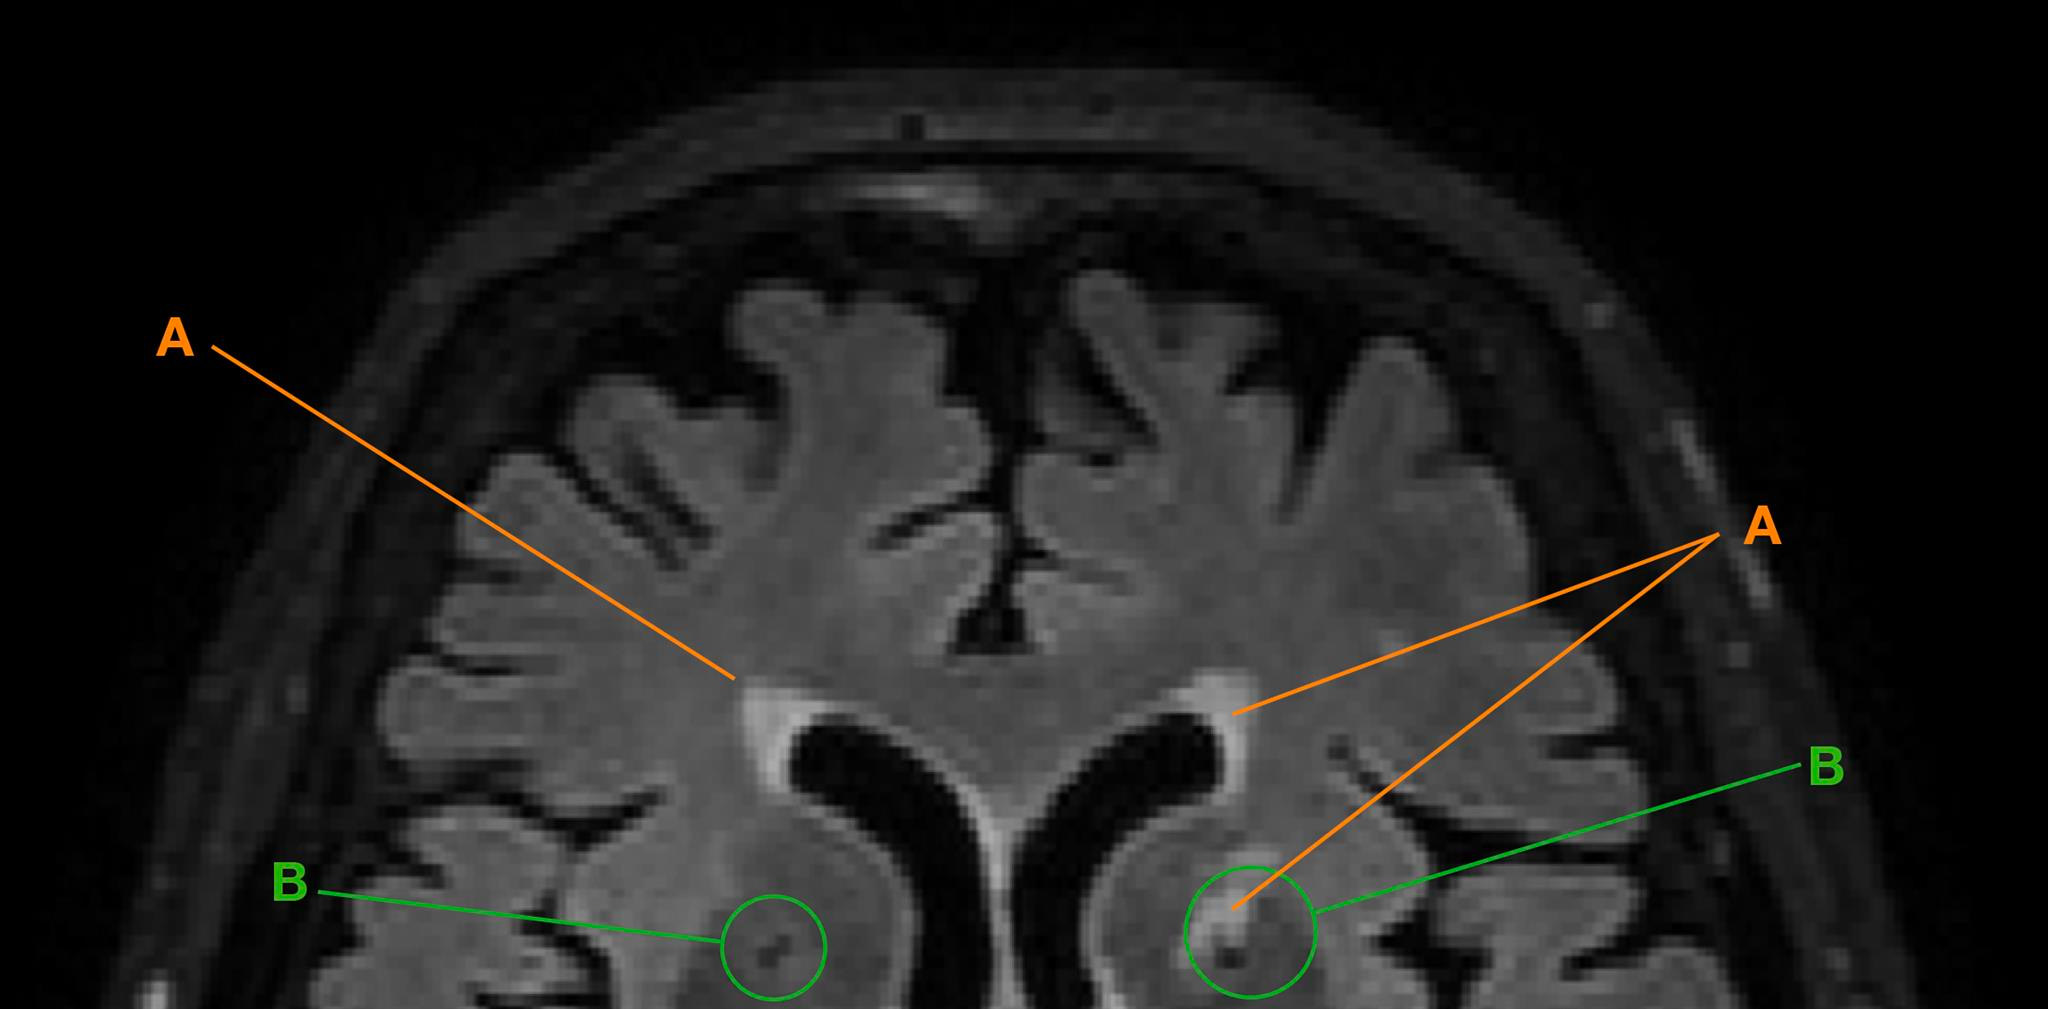 Section of a brain measured by MRI in horizontal section with white matter hyperintensities (A) and lacunae (B).